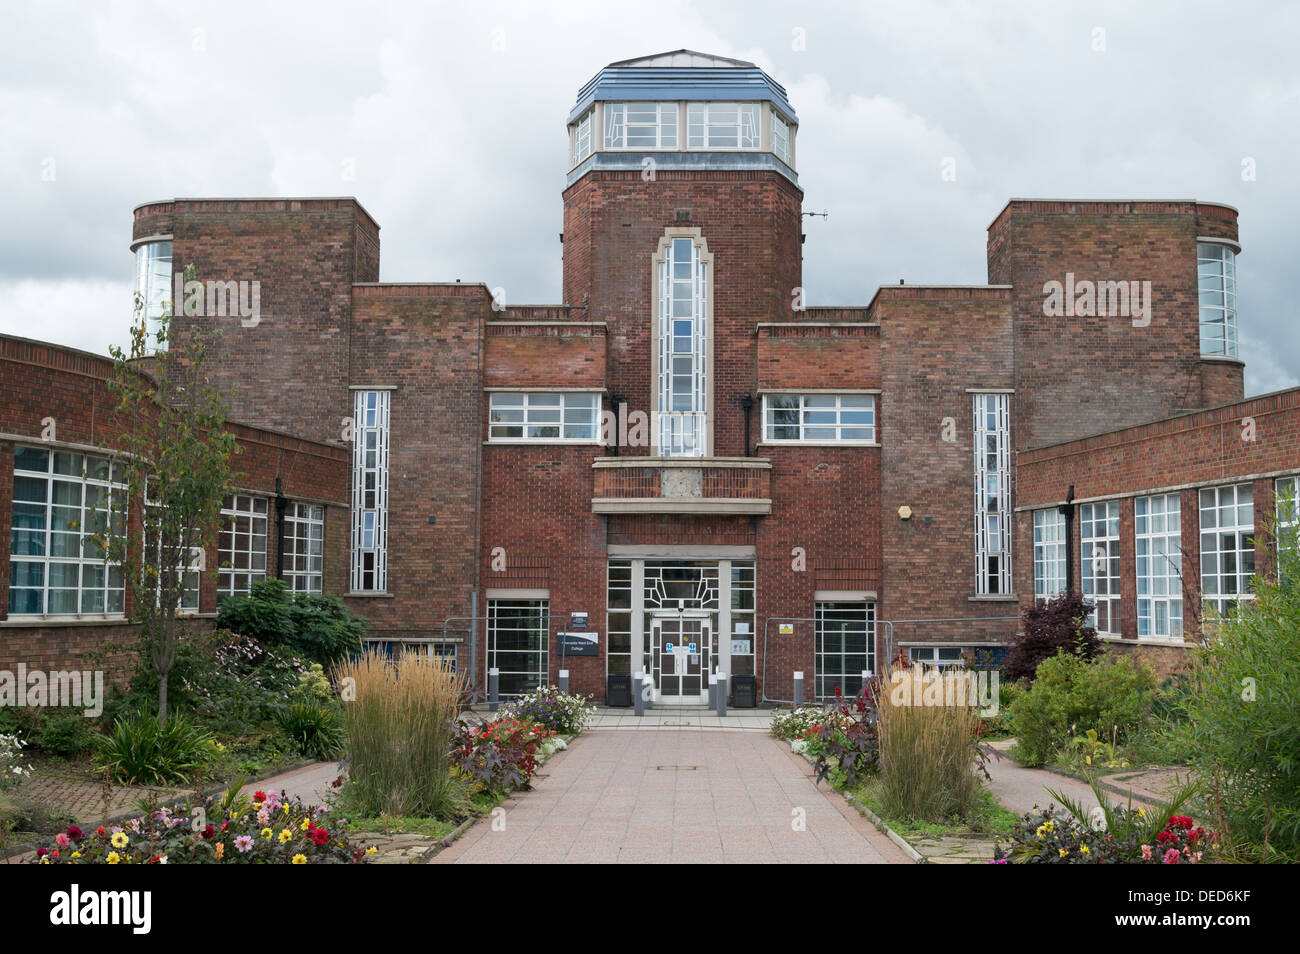 Newcastle west end college art deco style building, Benwell north east England, UK Stock Photo